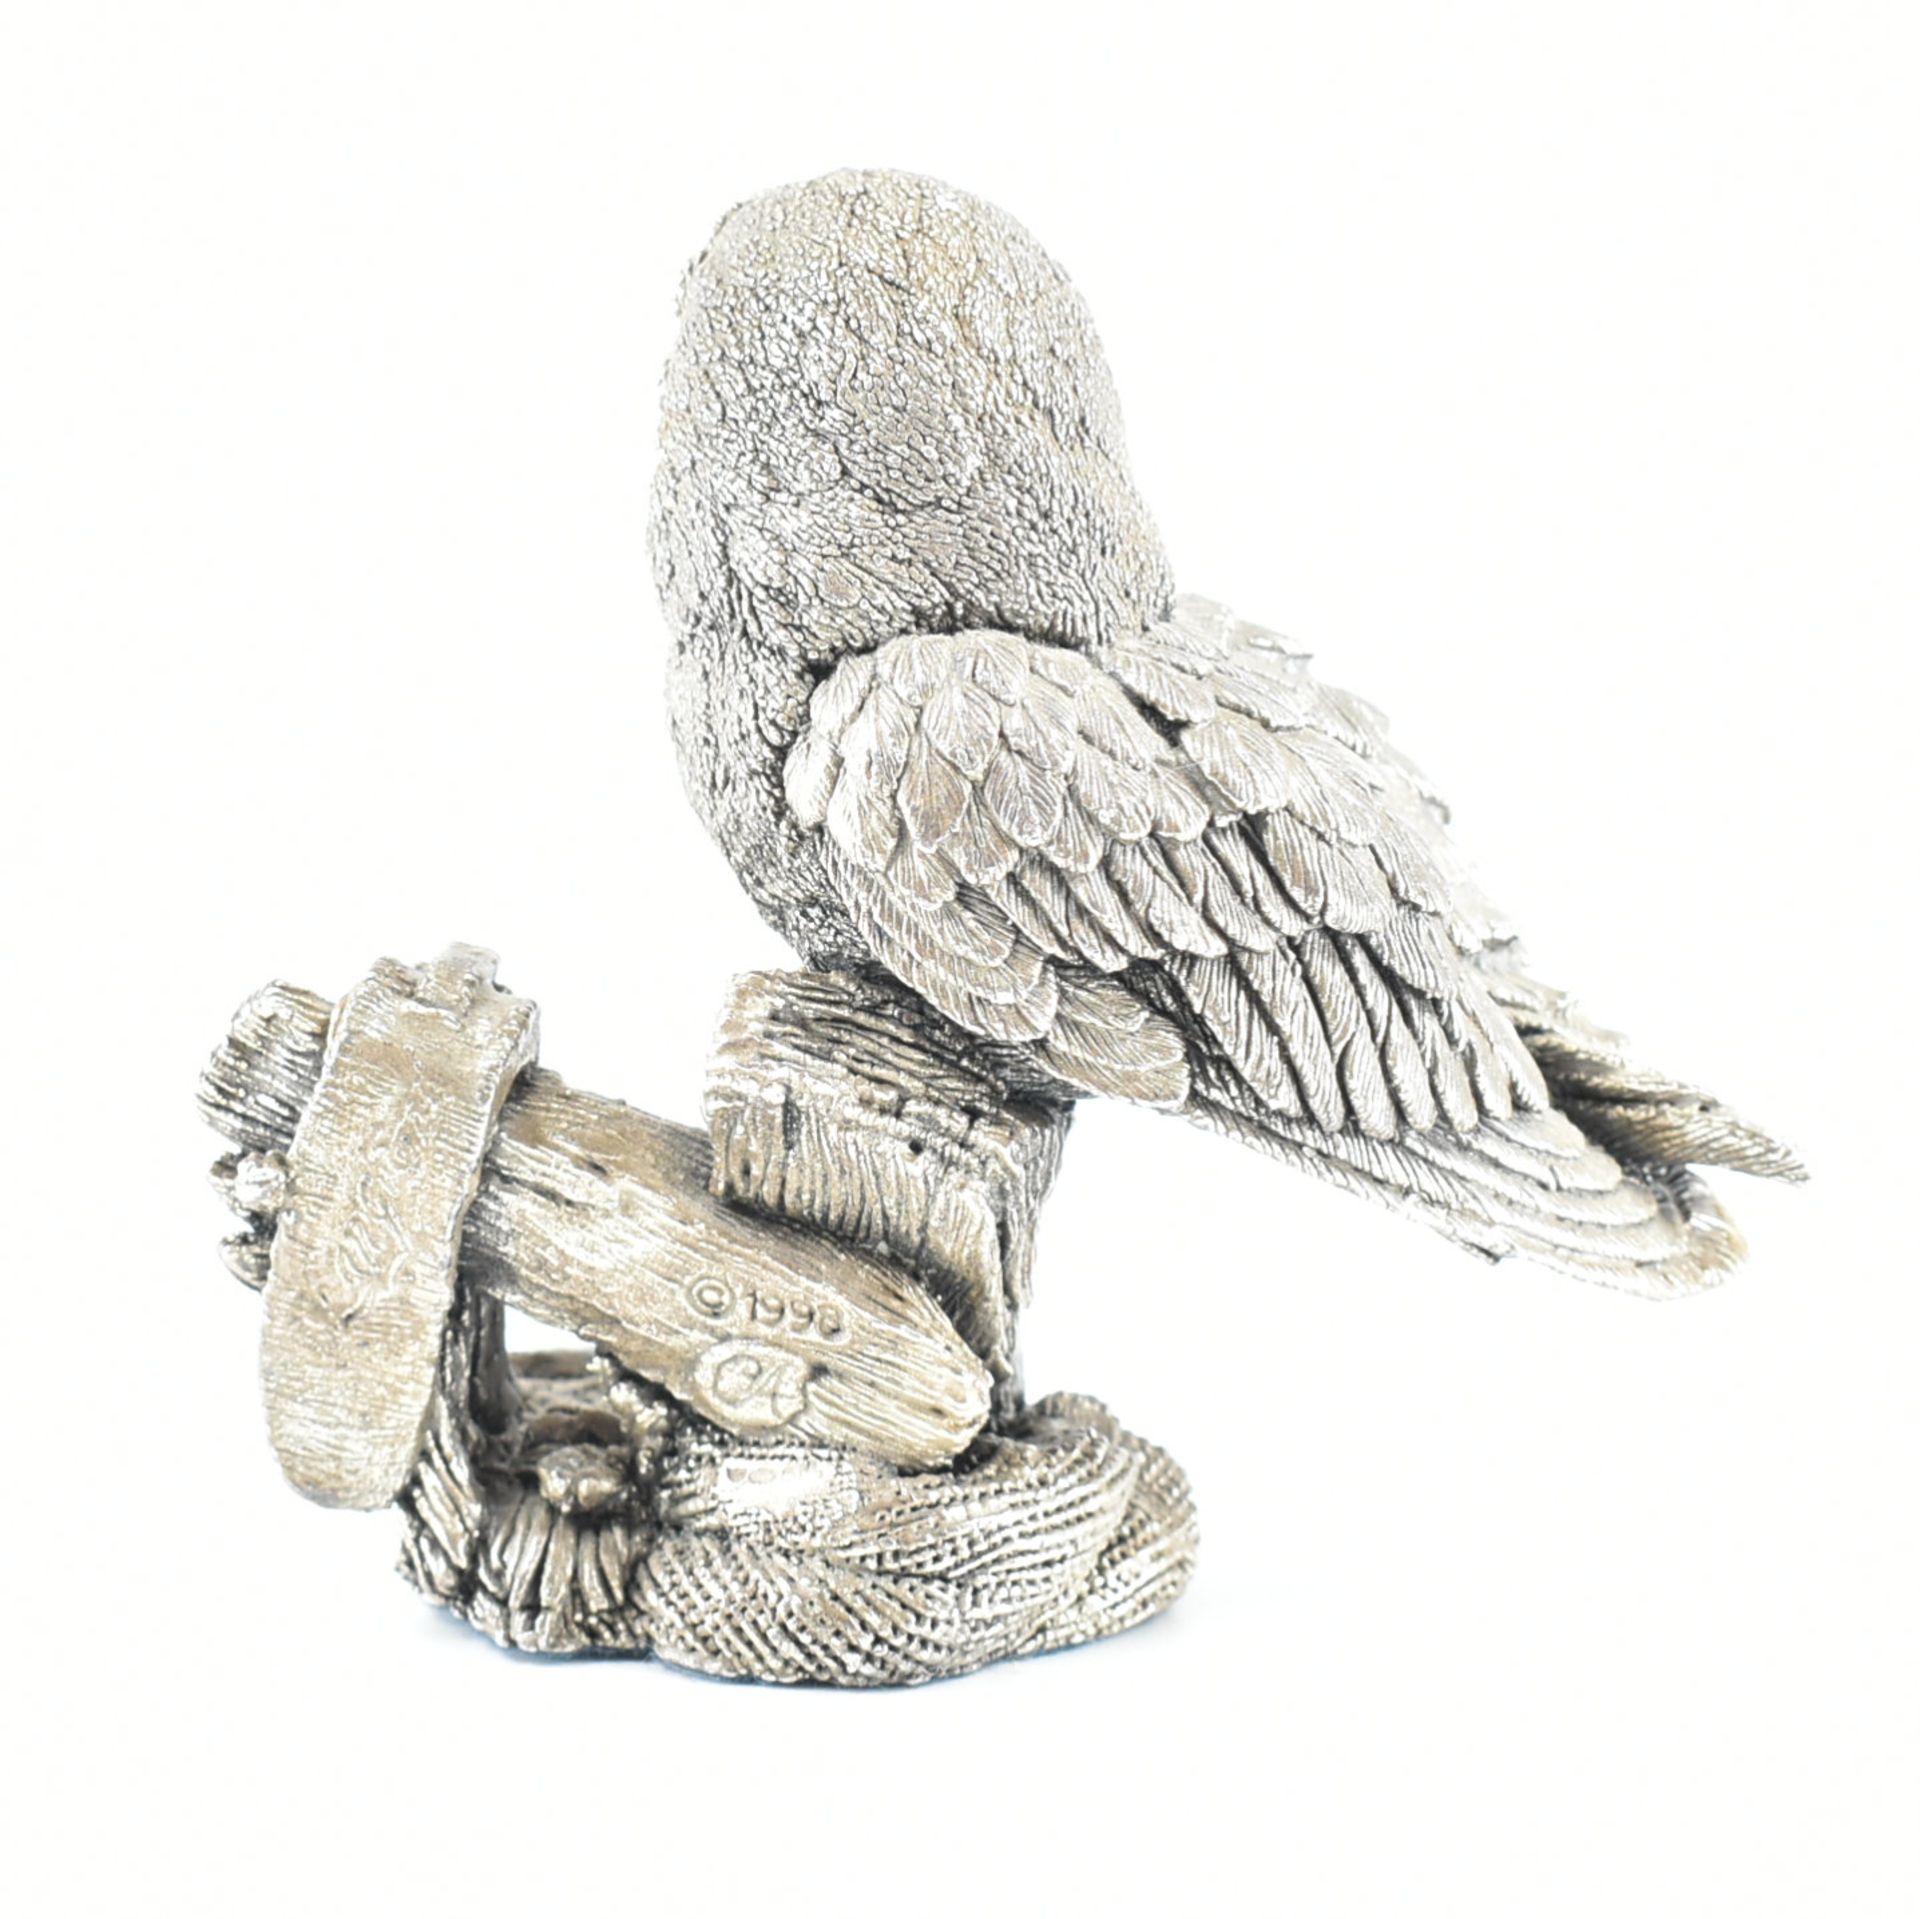 STERLING SILVER OWL FIGURINE MARKED FOR COUNTRY ARTIST - Image 2 of 3